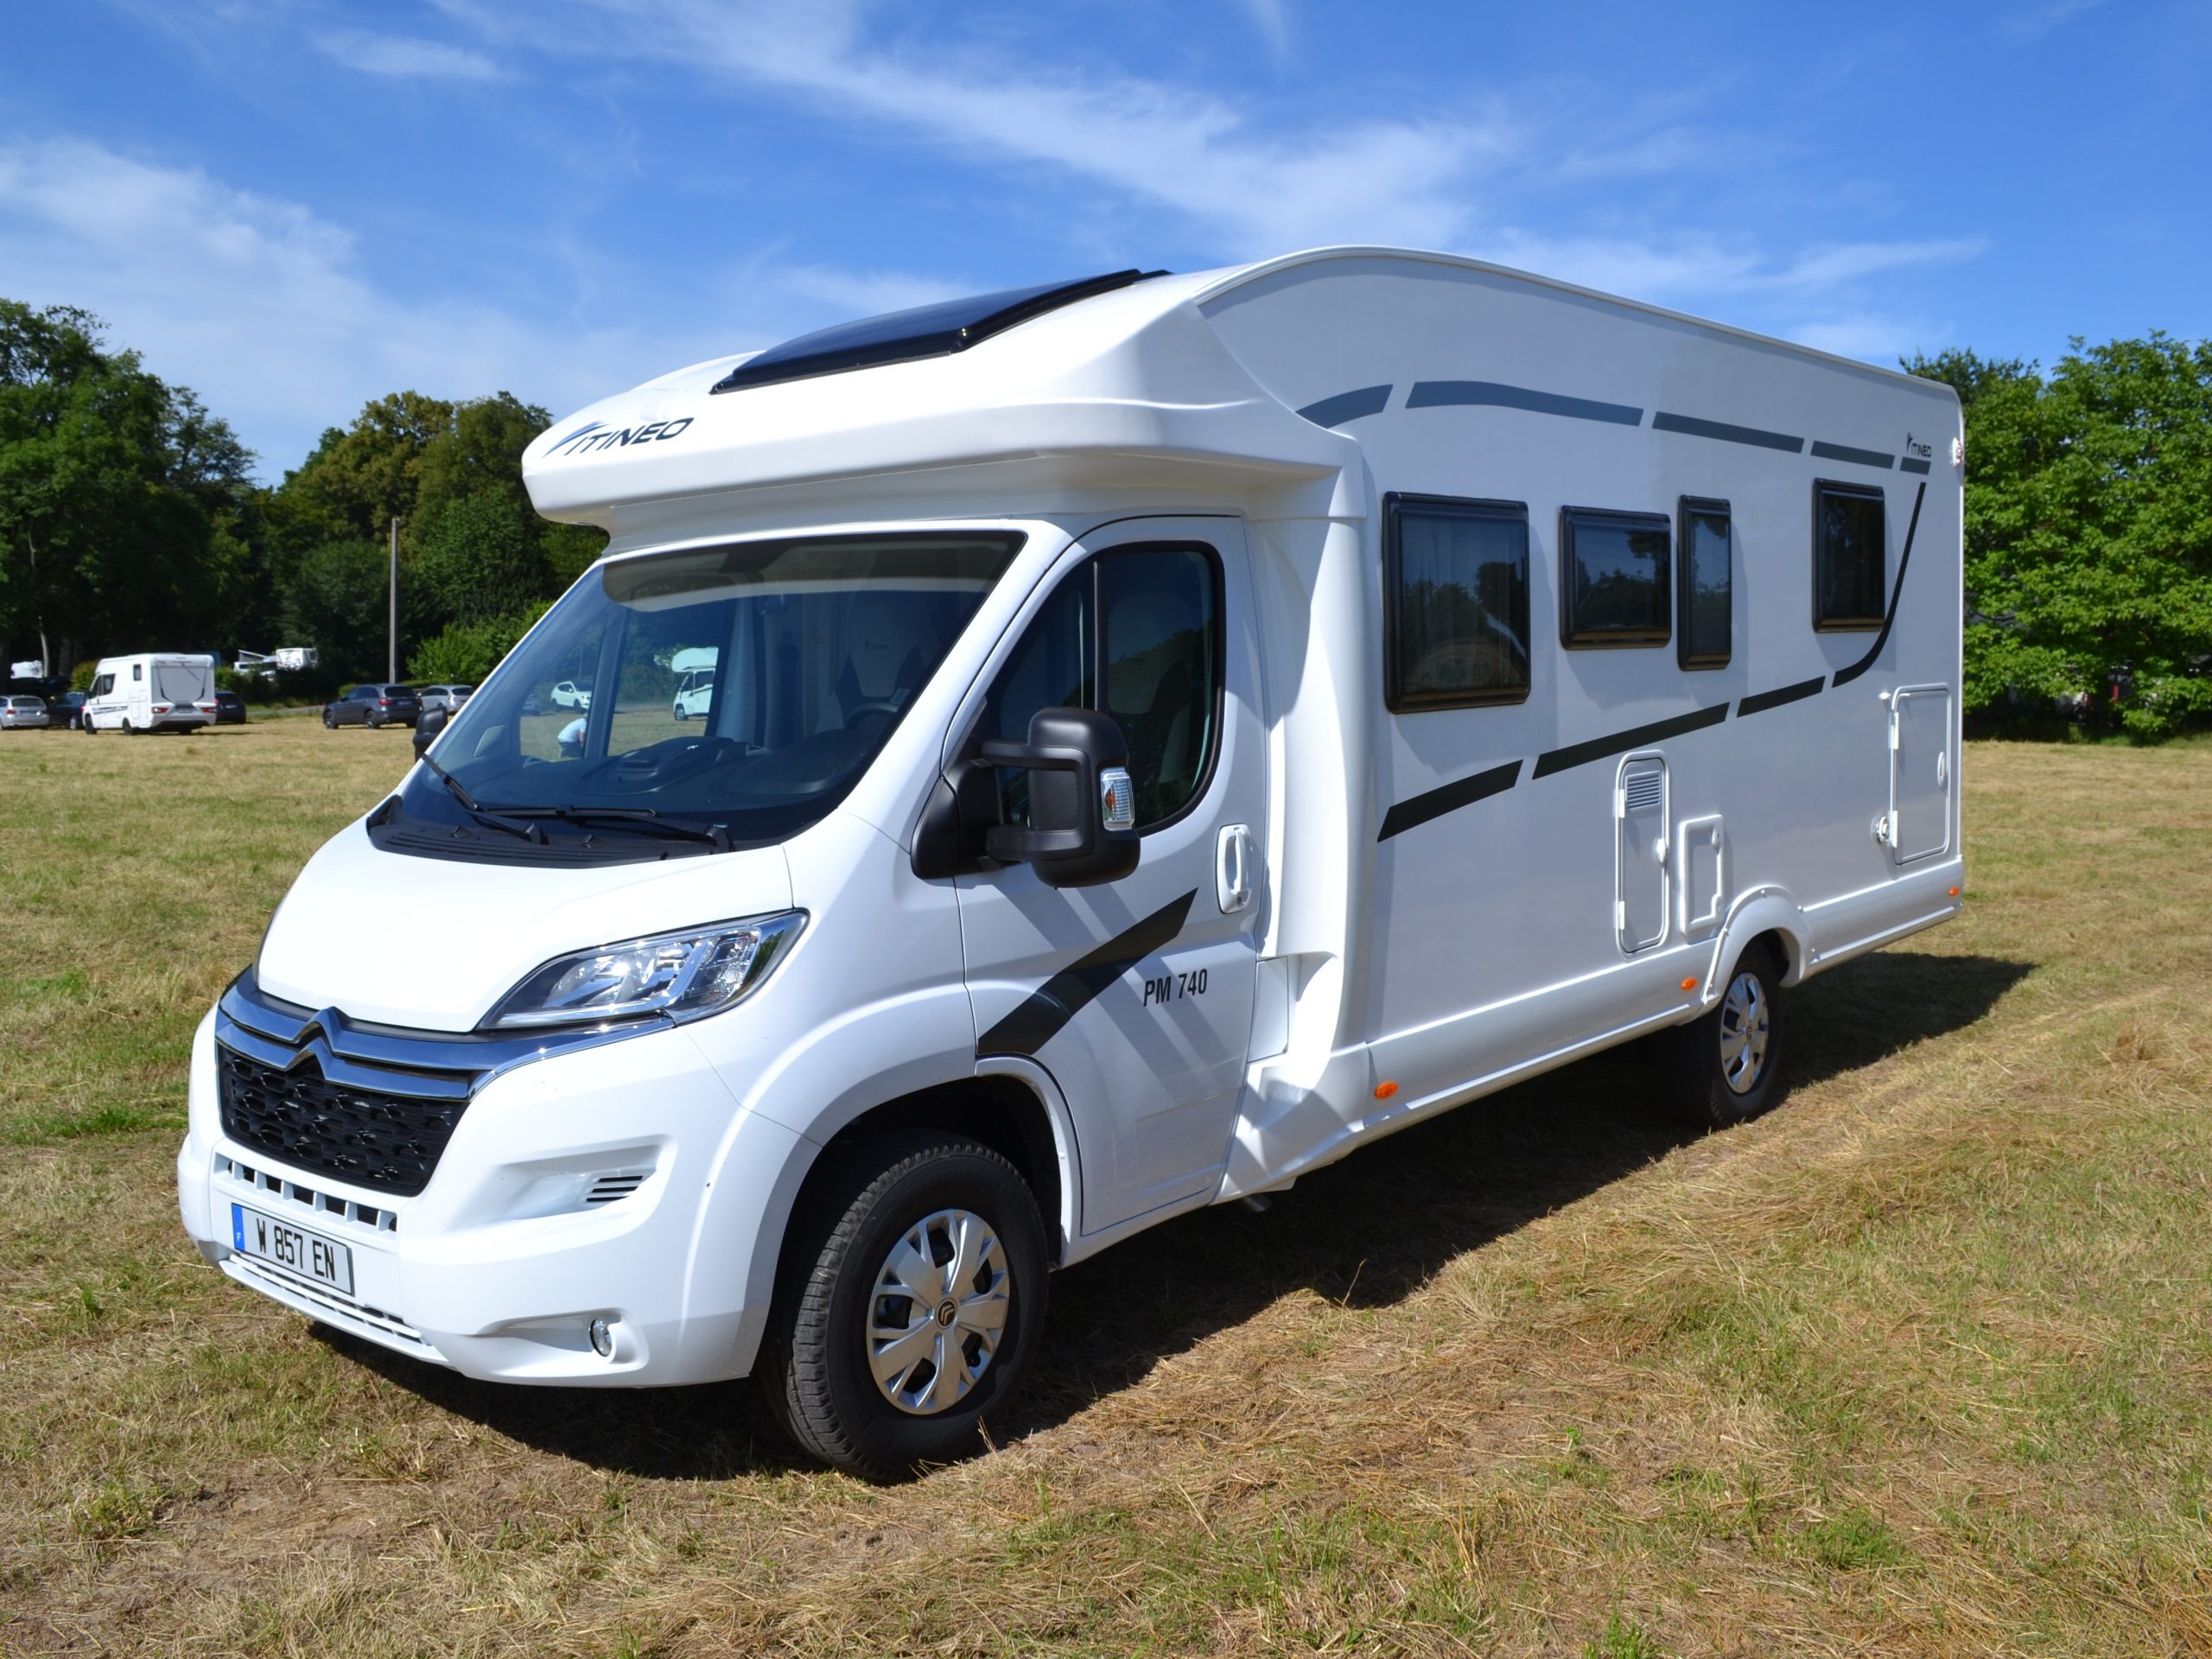 Rapido's 2019 offering revealed - Practical Motorhome